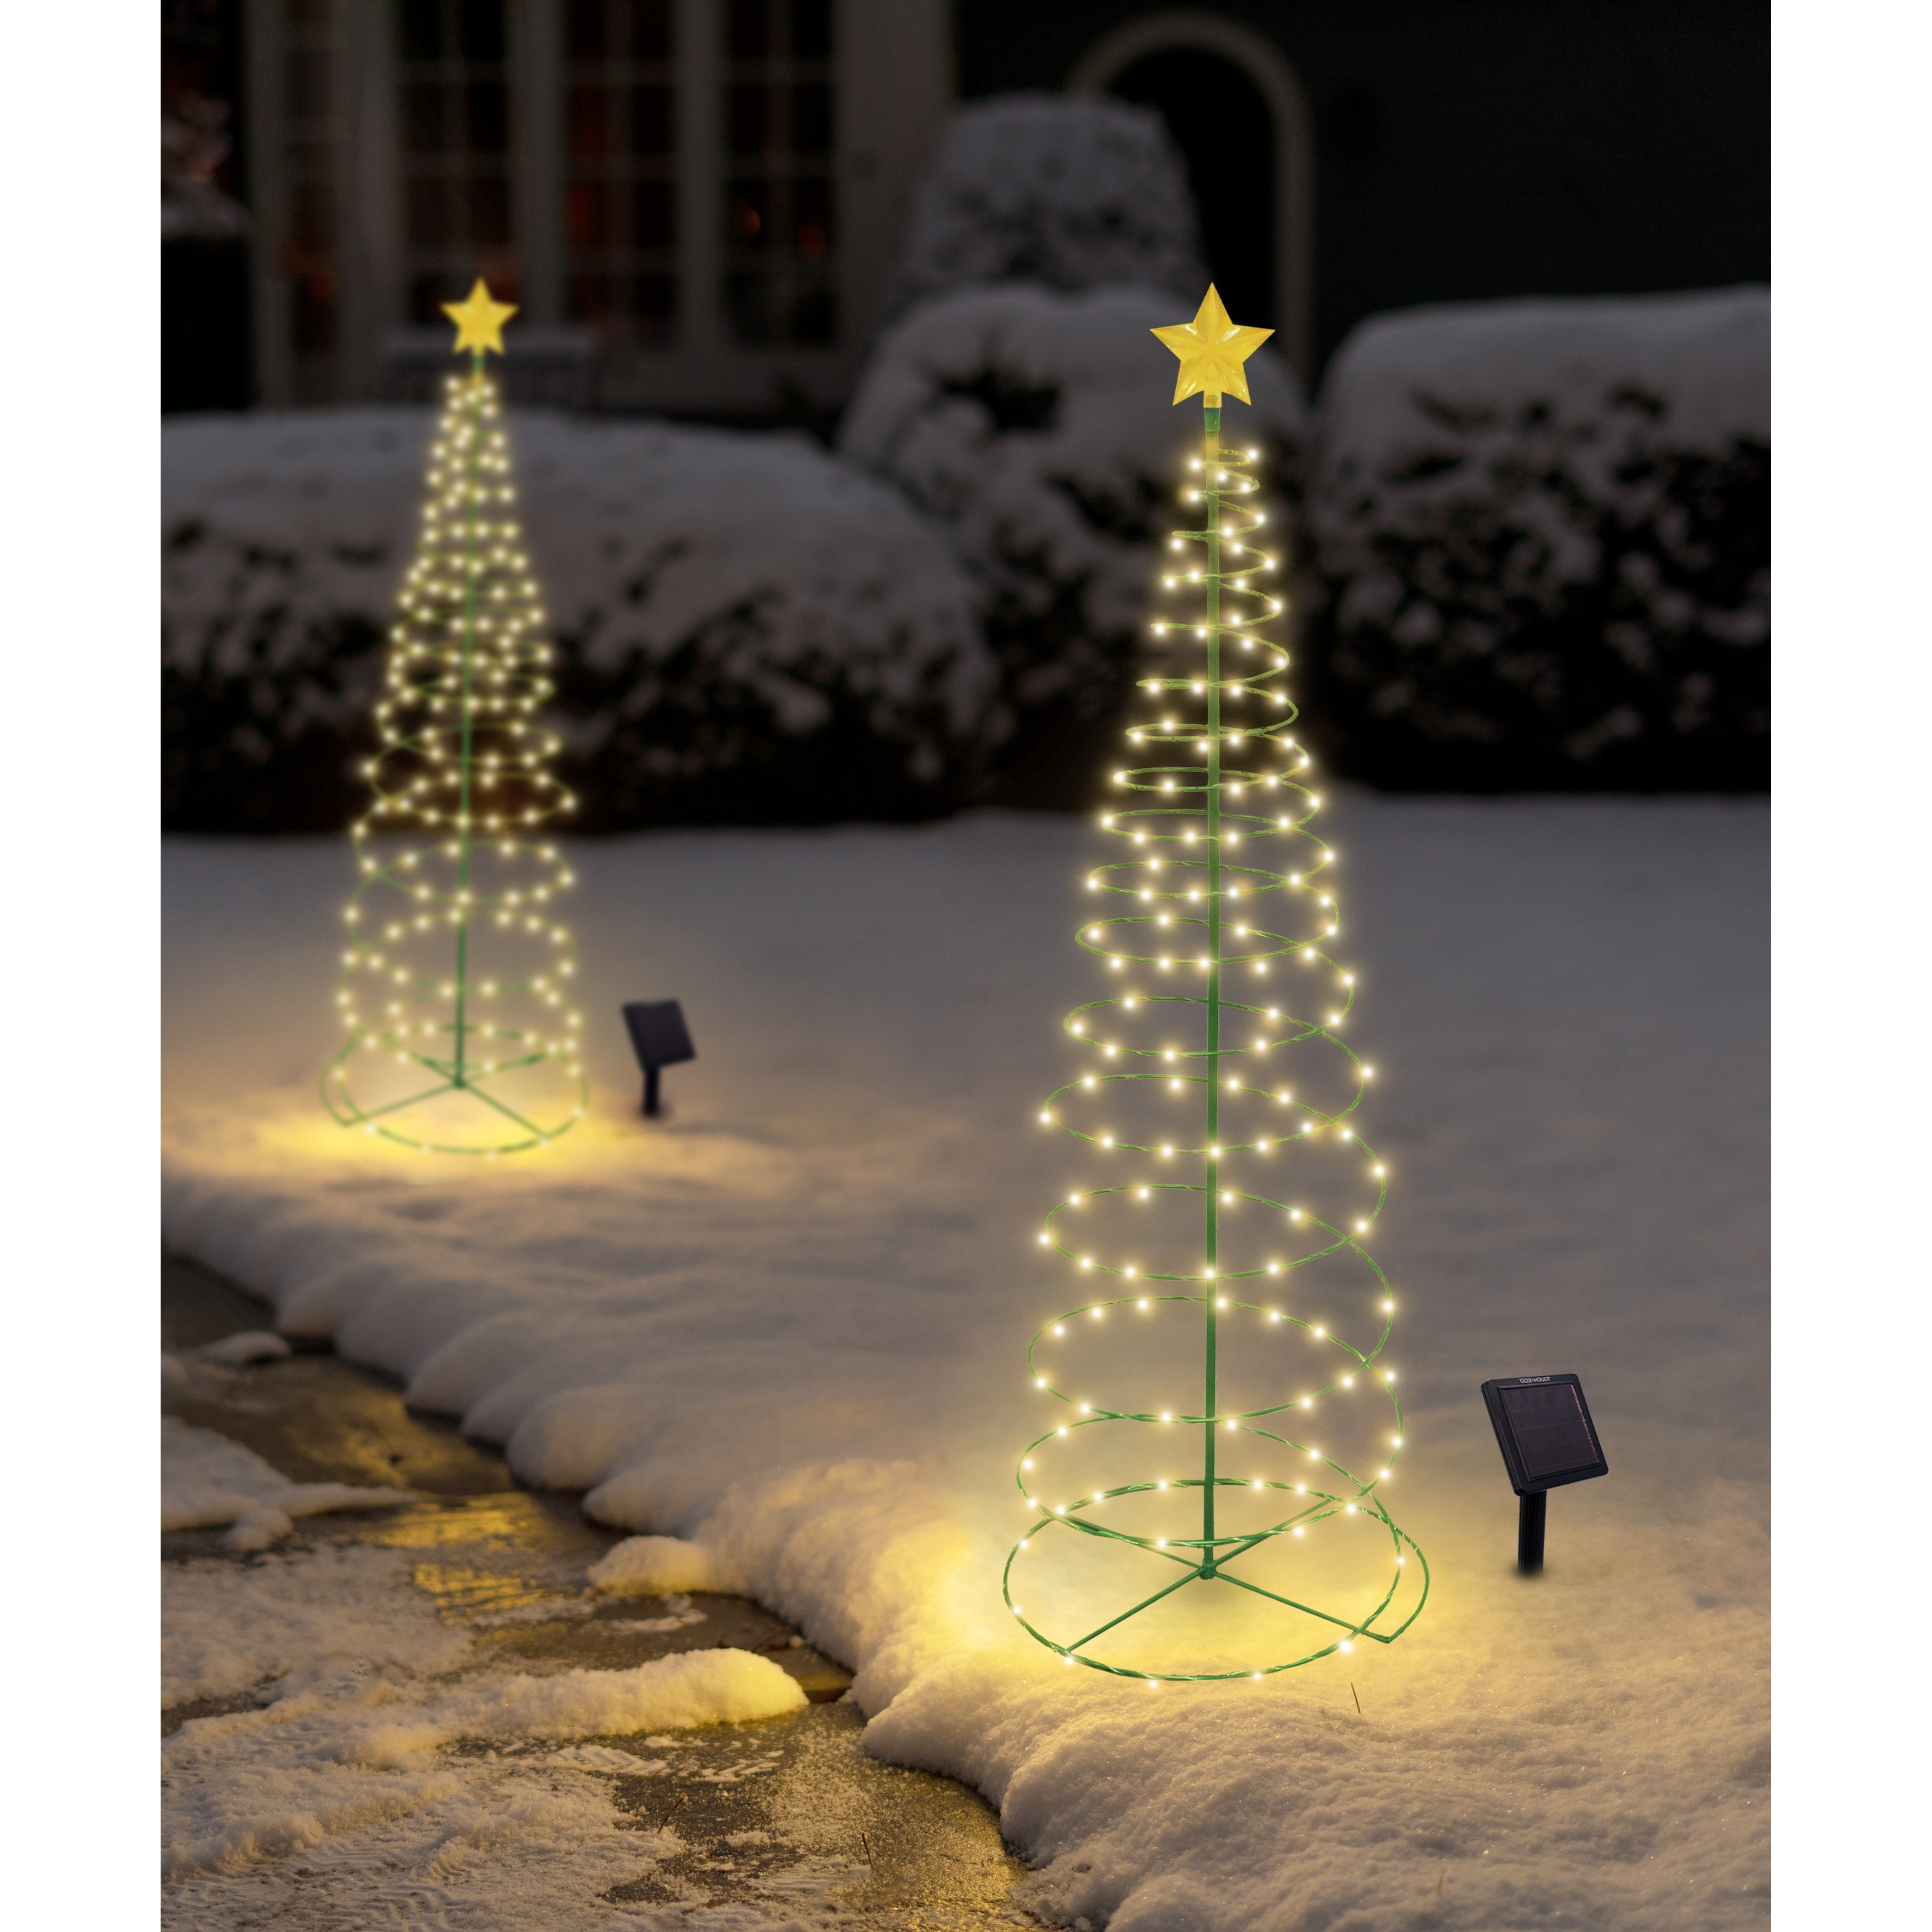 https://ak1.ostkcdn.com/images/products/is/images/direct/d5aad467af40287a5ad318604ca73a95a94e8ce4/Solar-LED-Metal-4-foot-Christmas-Tree-Light-Decoration.jpg